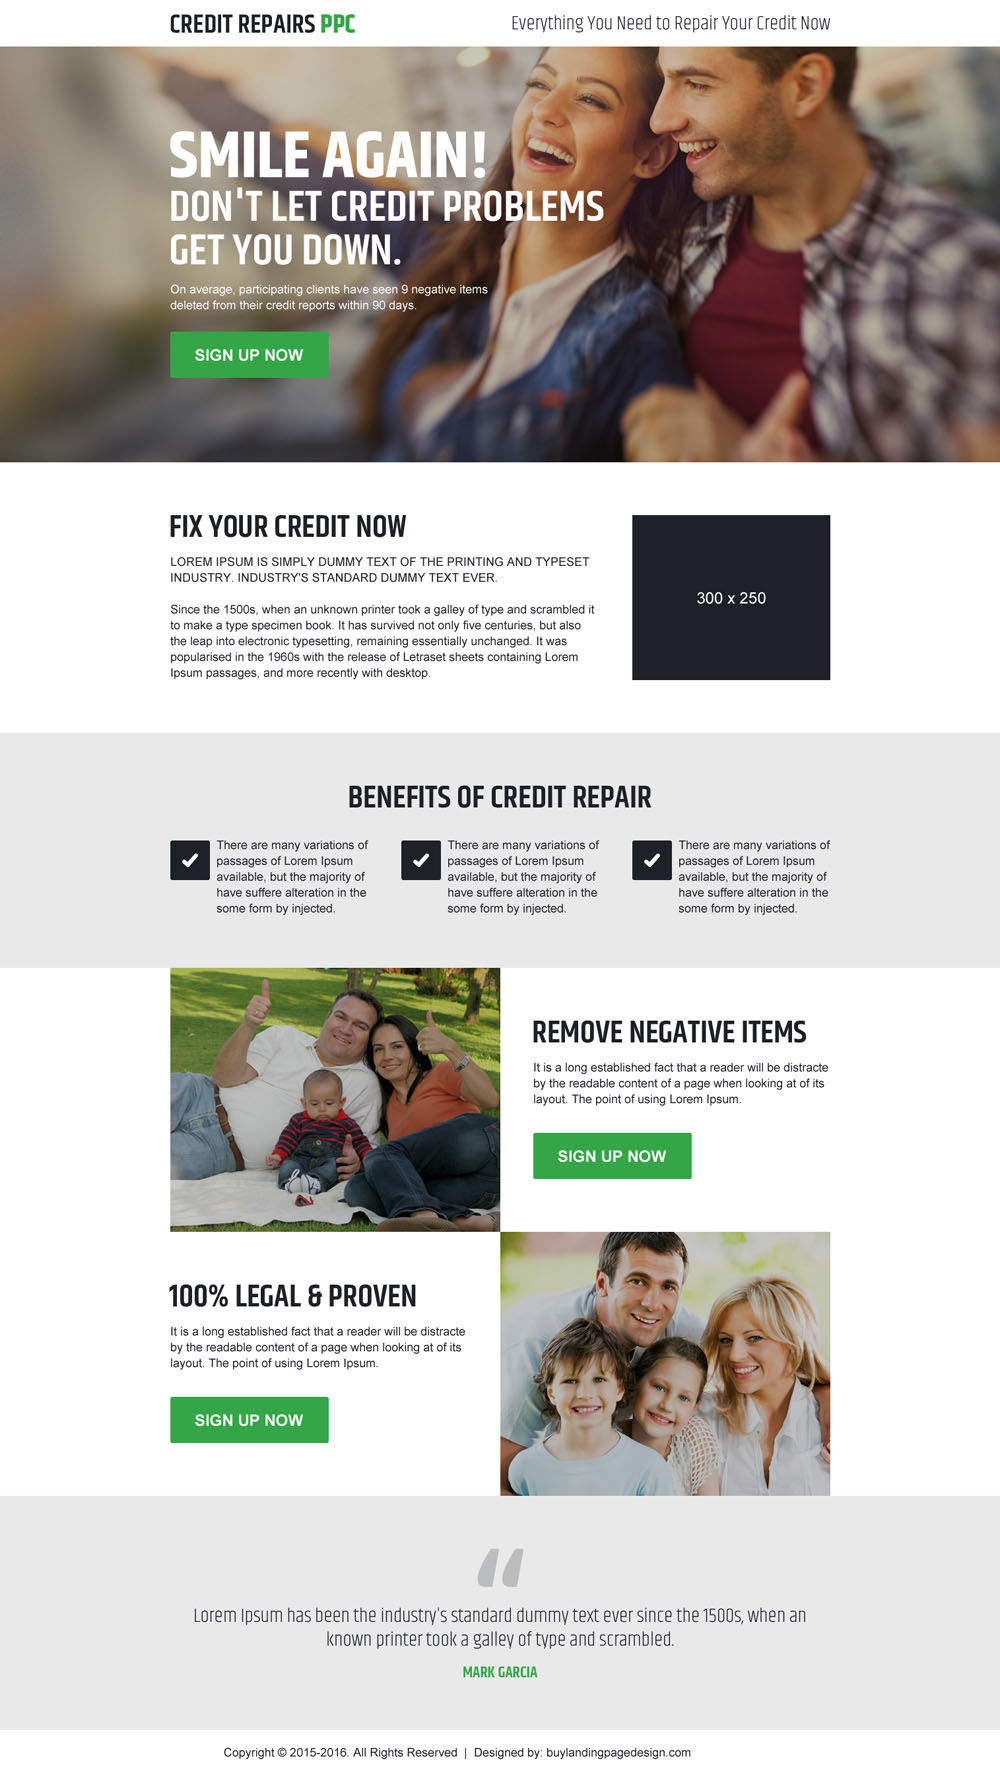 credit-repair-pay-per-click-sign-up-lead-gen-converting-landing-page-design-027